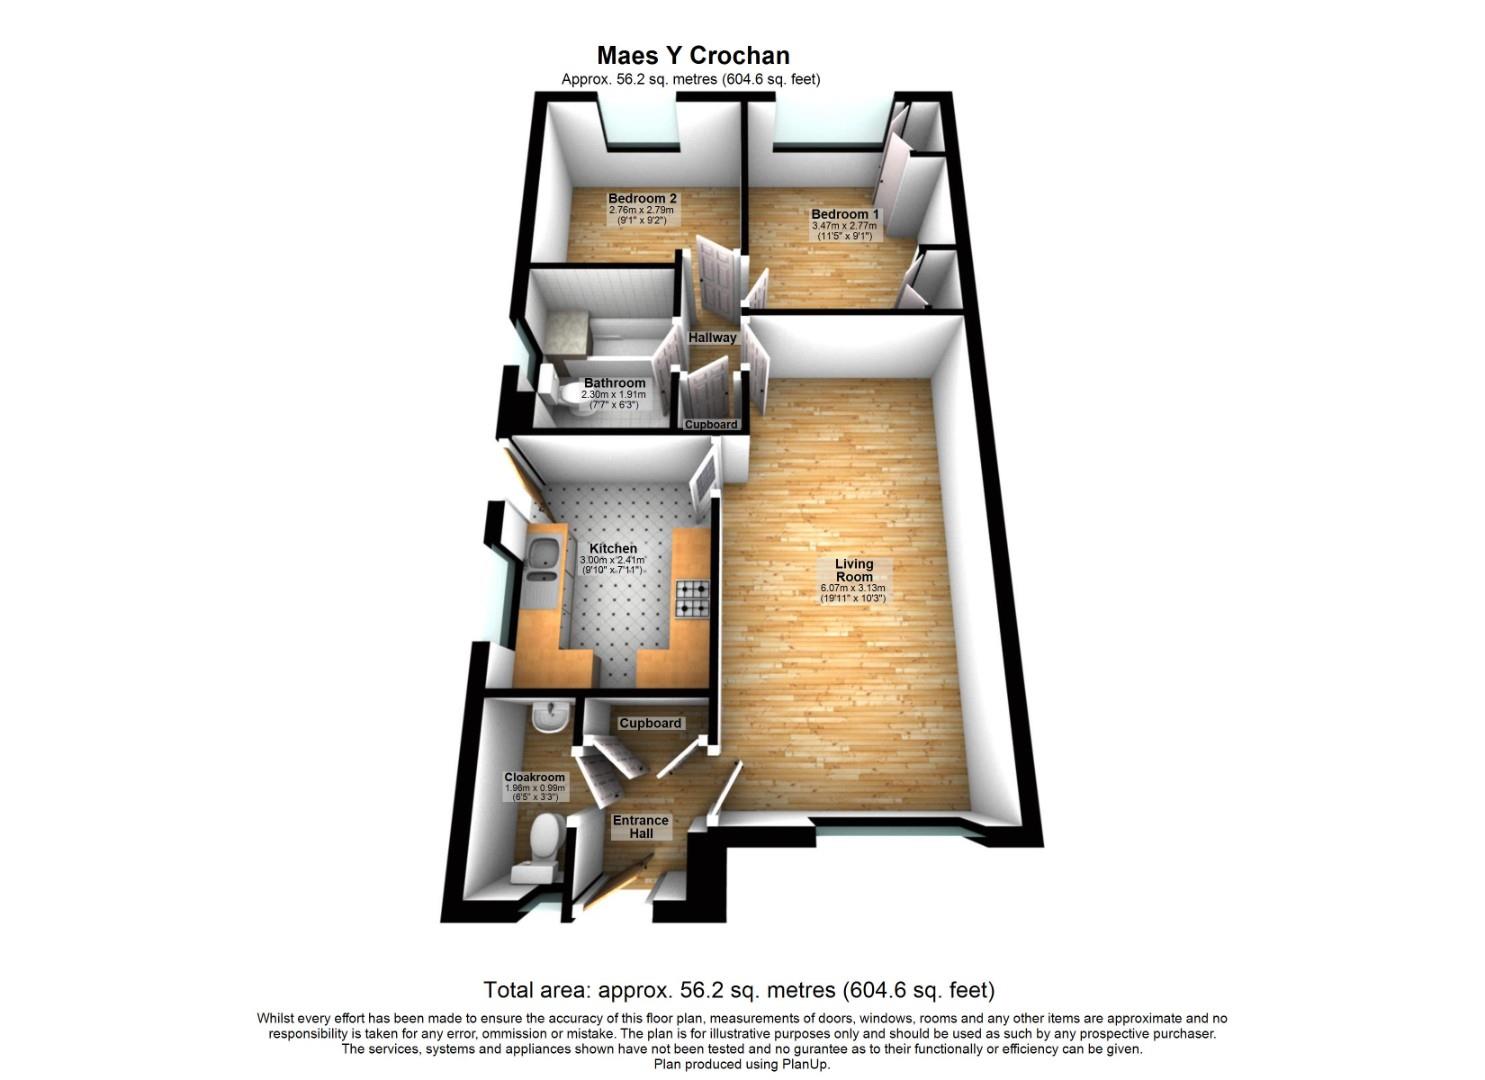 2 bed semi-detached bungalow for sale in Maes-Y-Crochan, Cardiff - Property floorplan